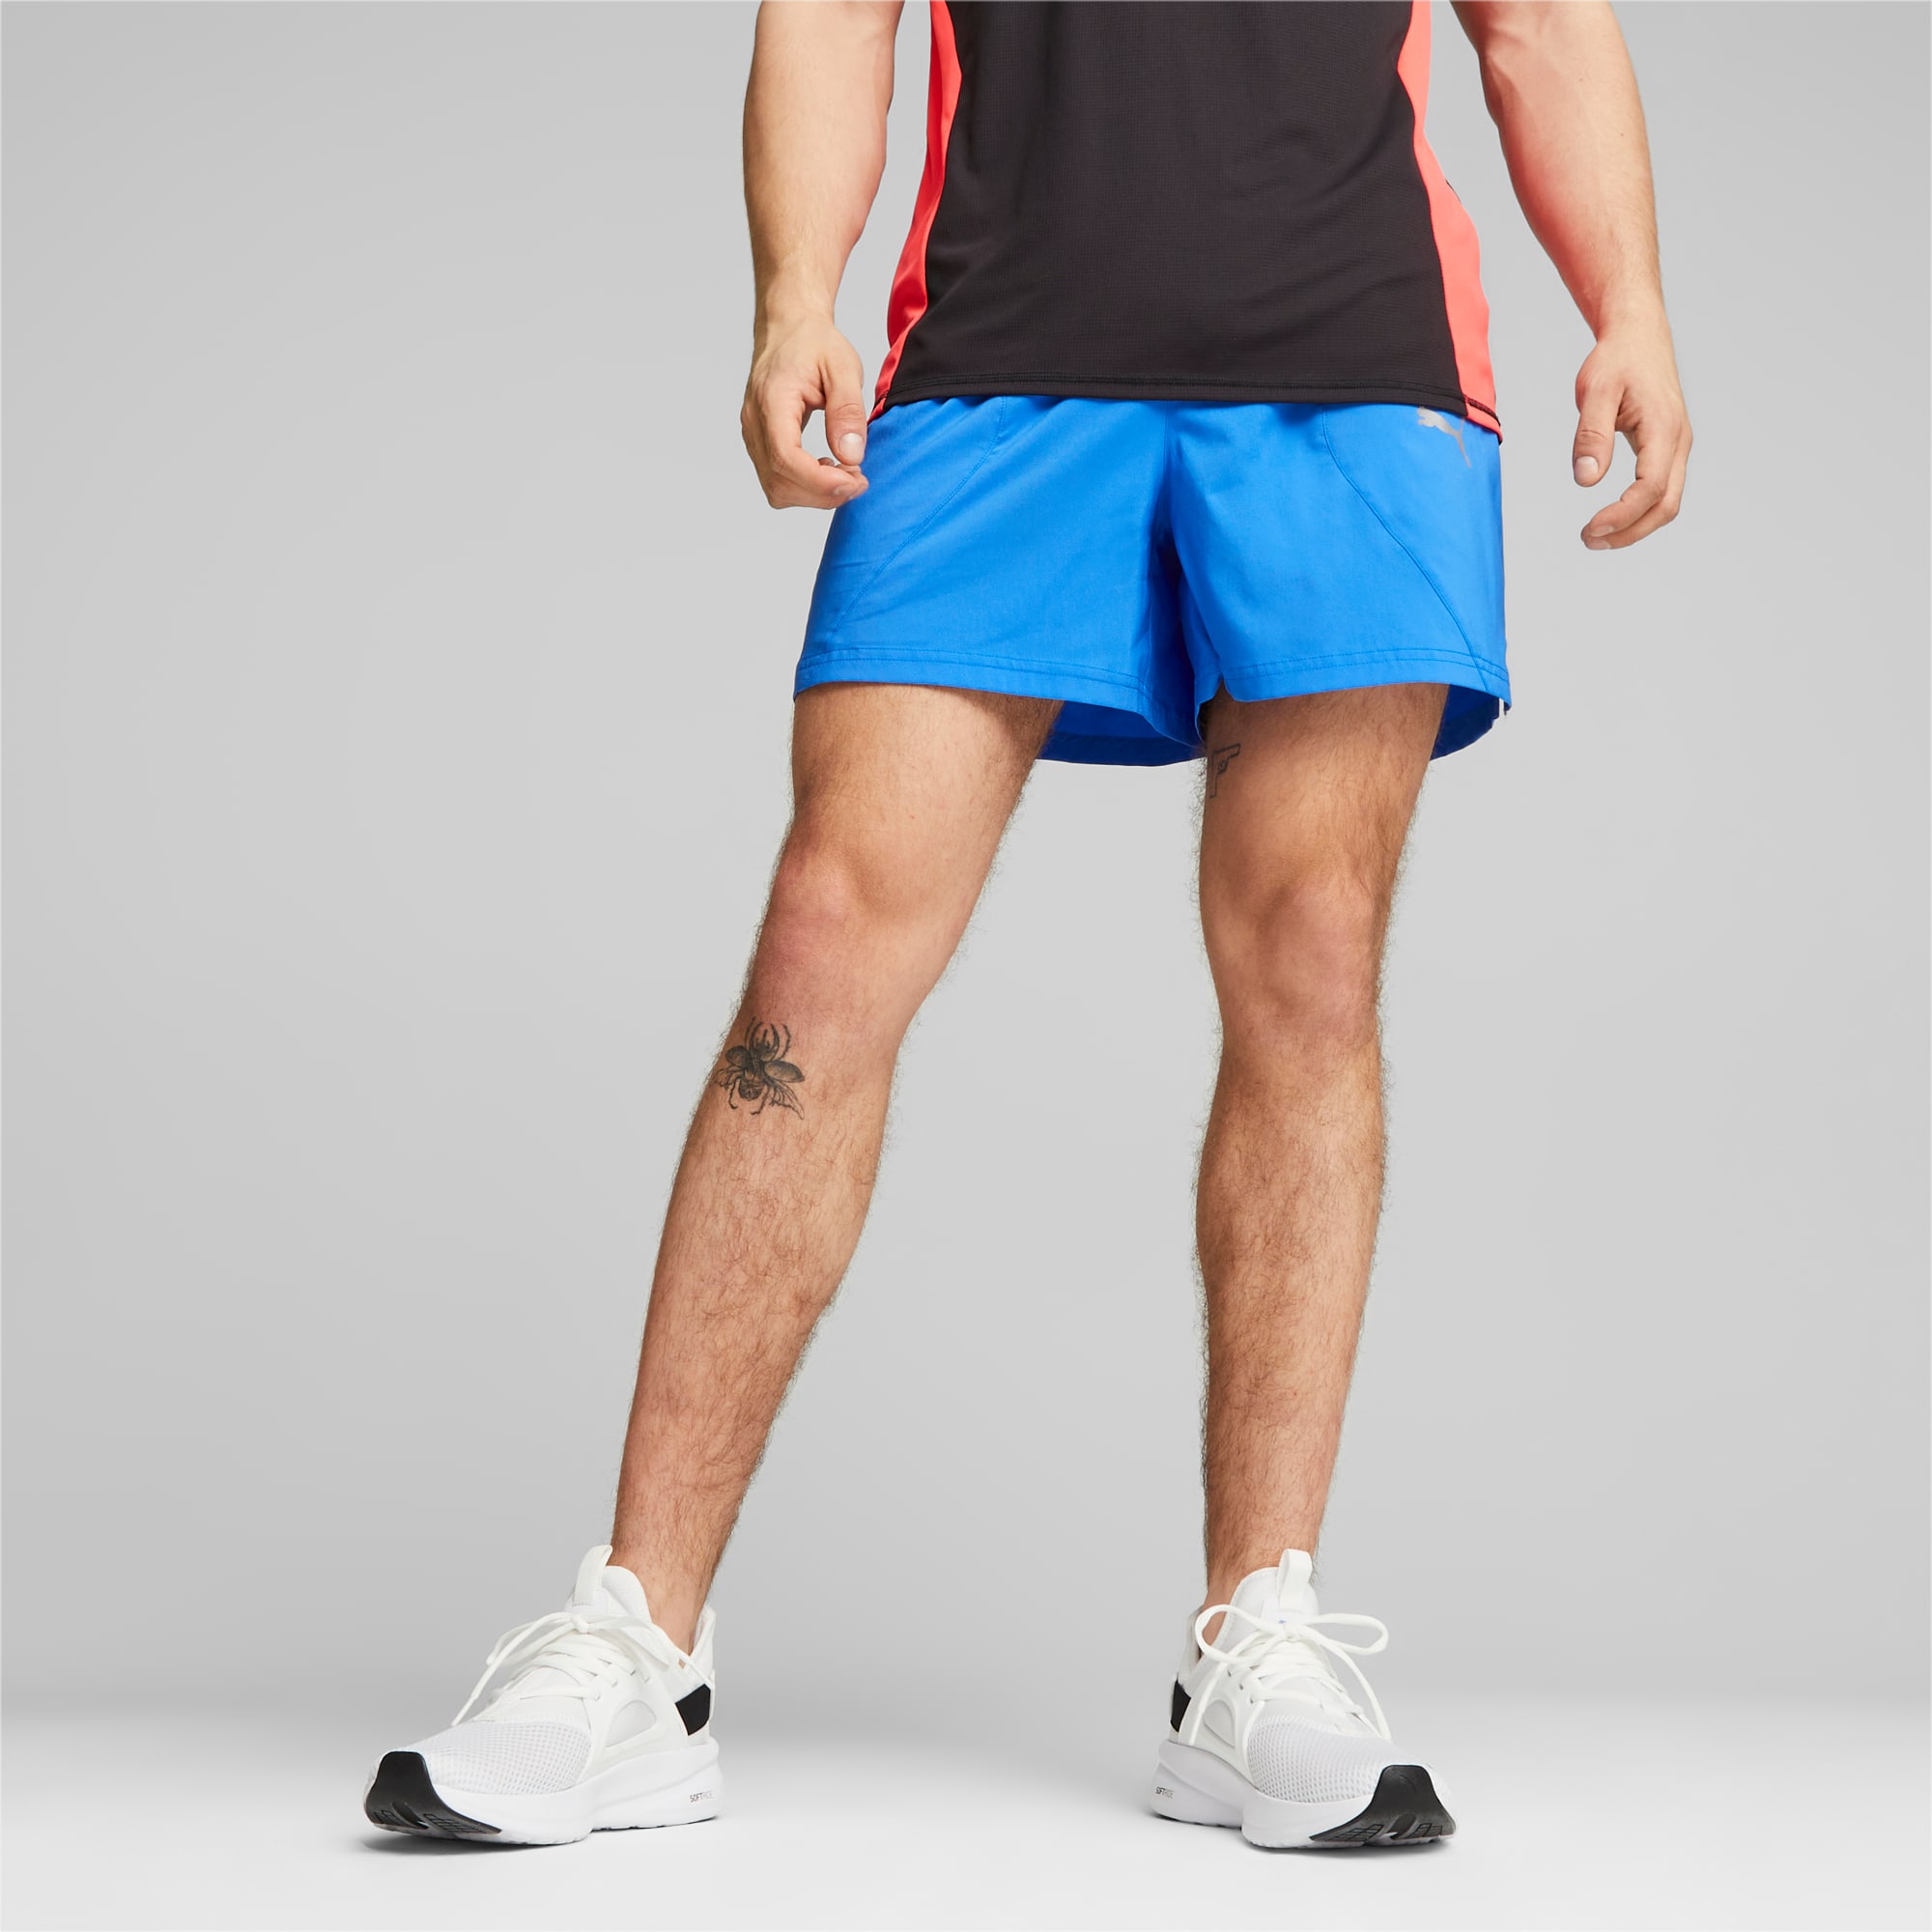 Running Shorts, Free shipping on orders $99+